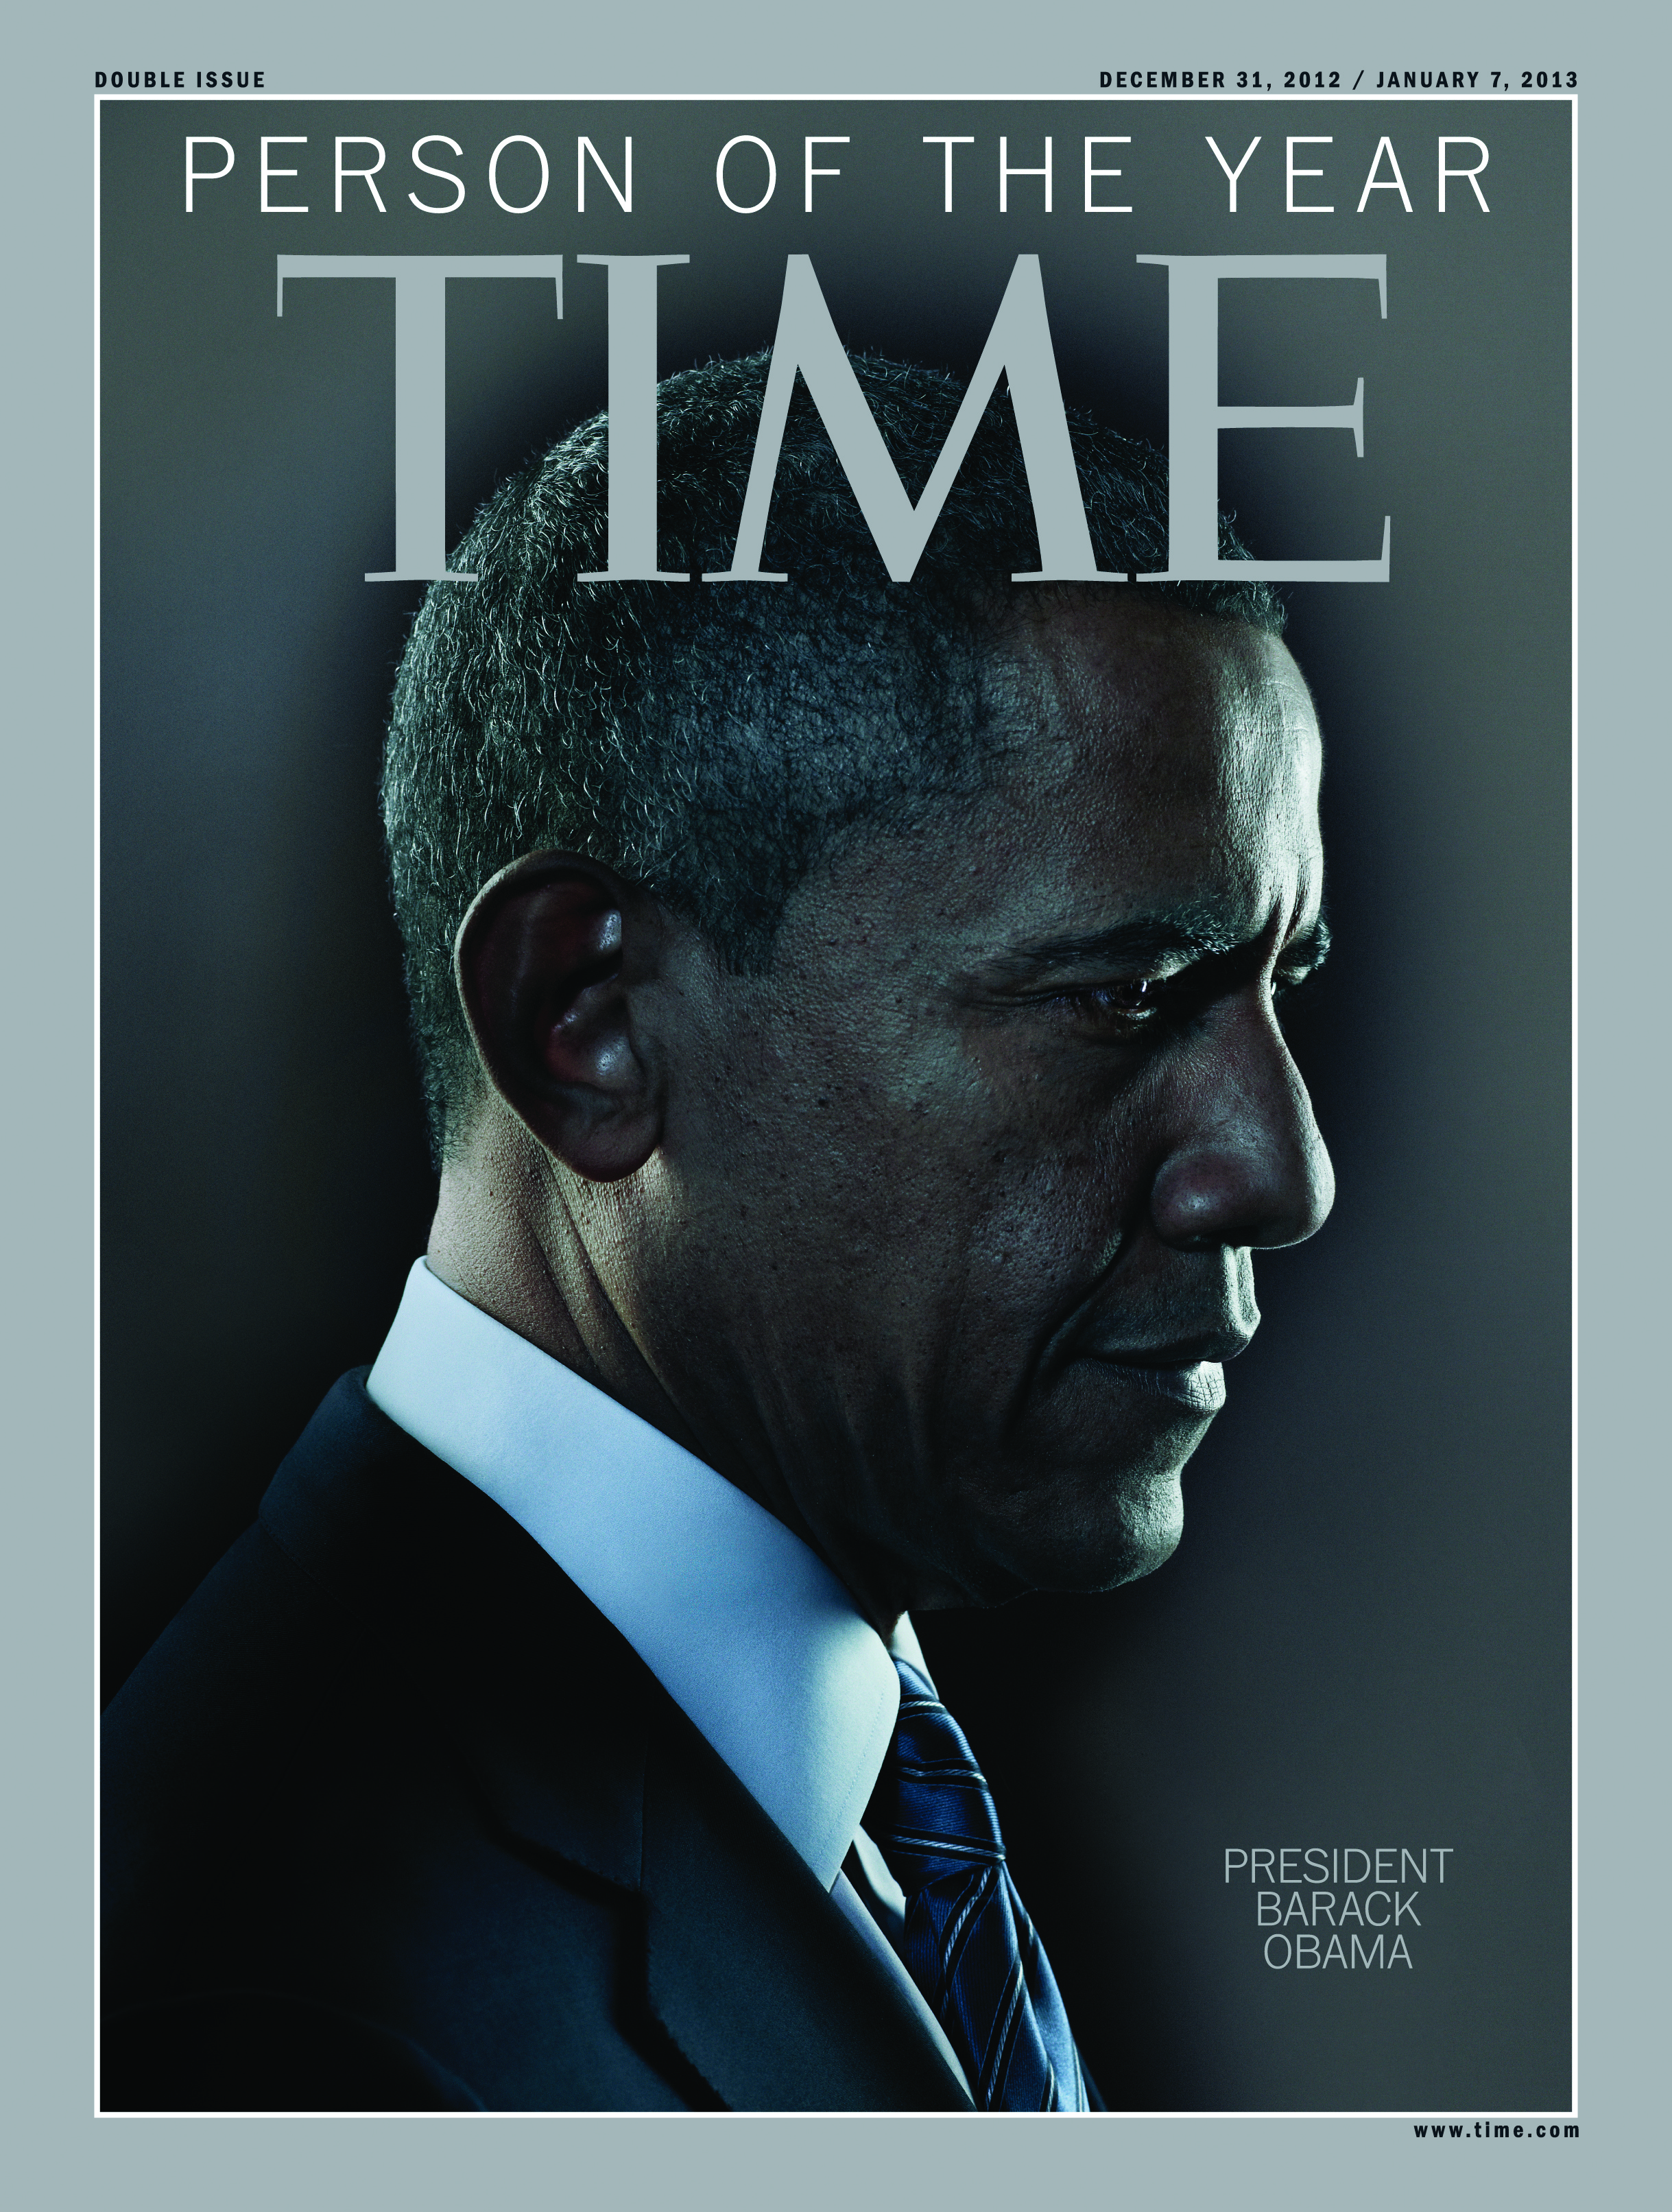 TIME-December 31, 2012–January 7, 2013: "Person of the Year"